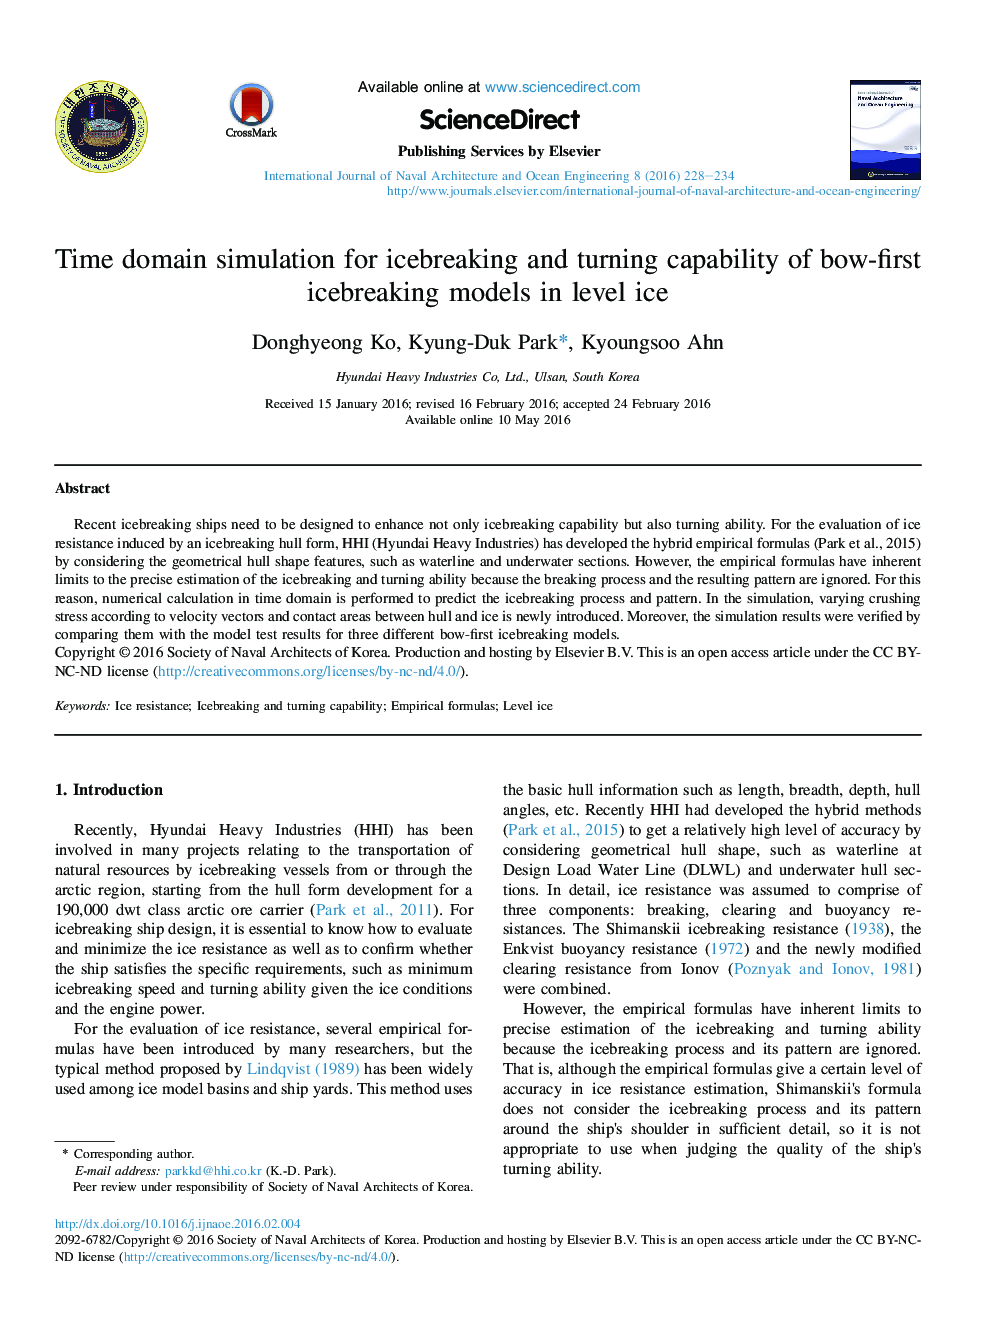 Time domain simulation for icebreaking and turning capability of bow-first icebreaking models in level ice 